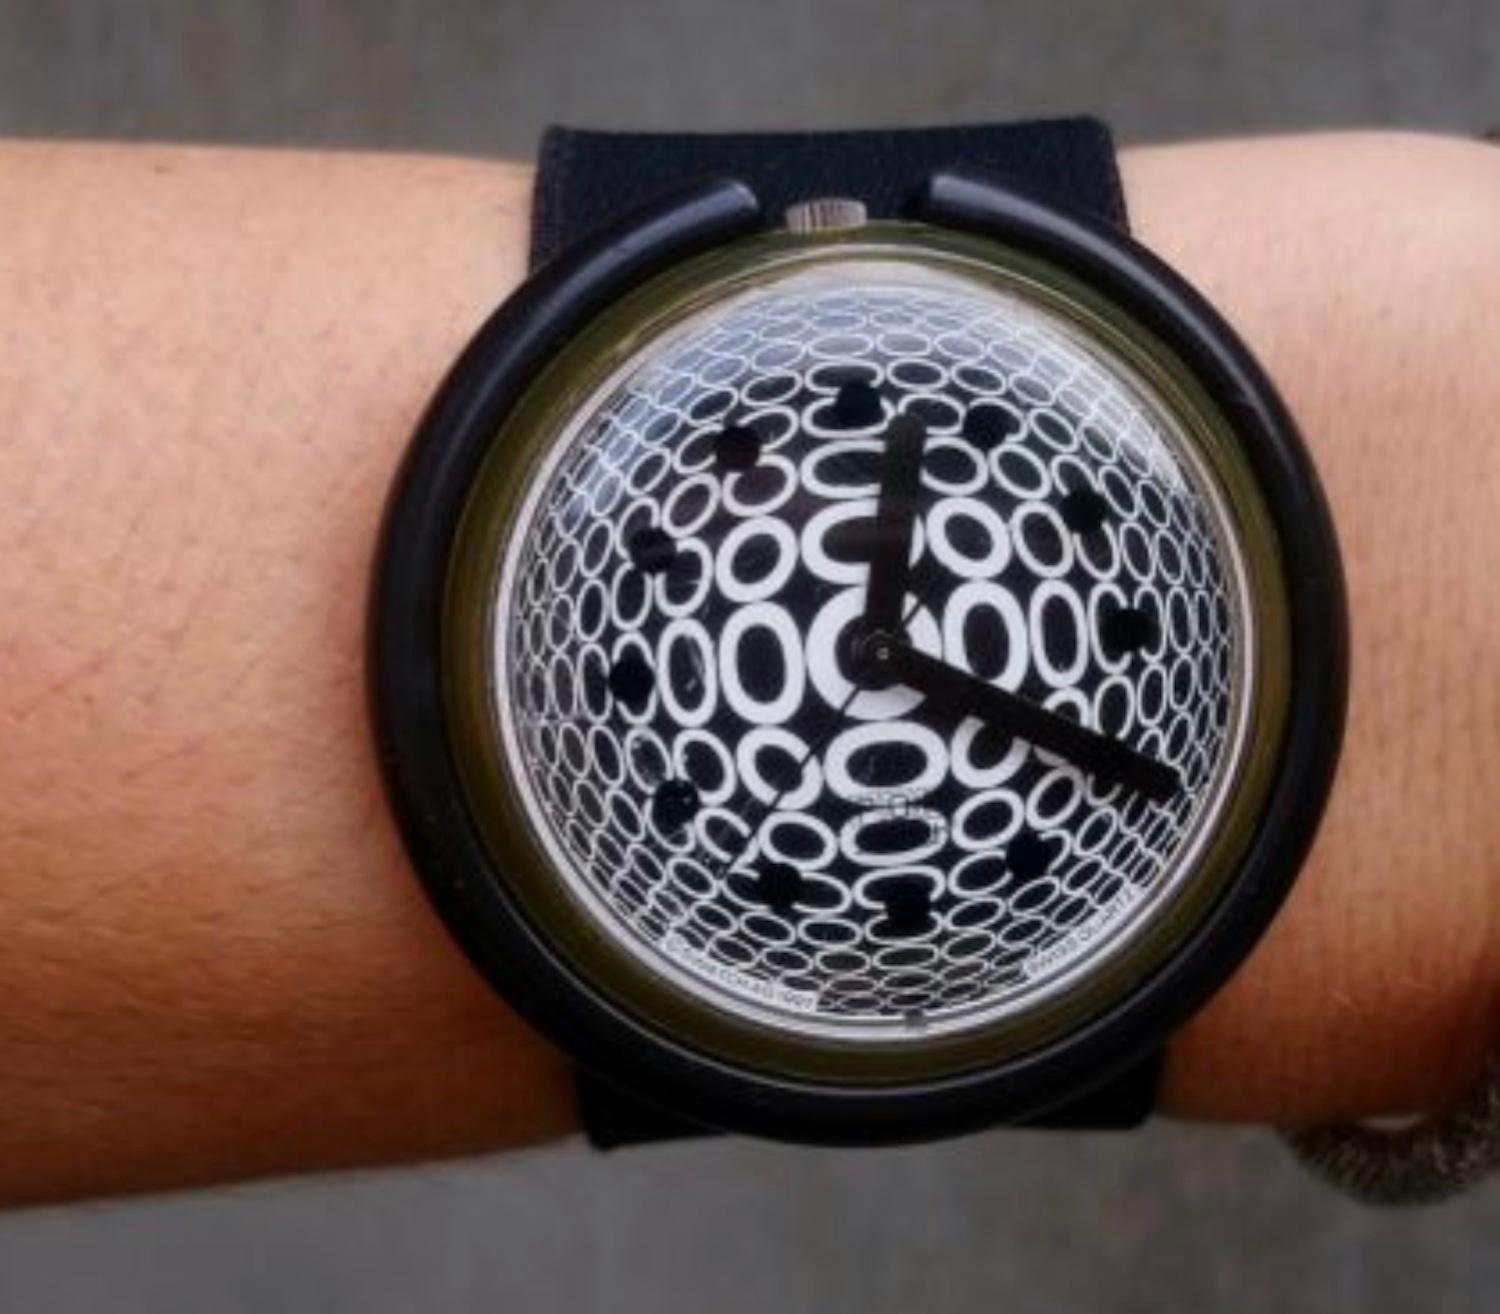 Swiss 1992 Vintage POP Swatch Watch Special Dots - Op Art - Designed by Vasarely - NOS For Sale